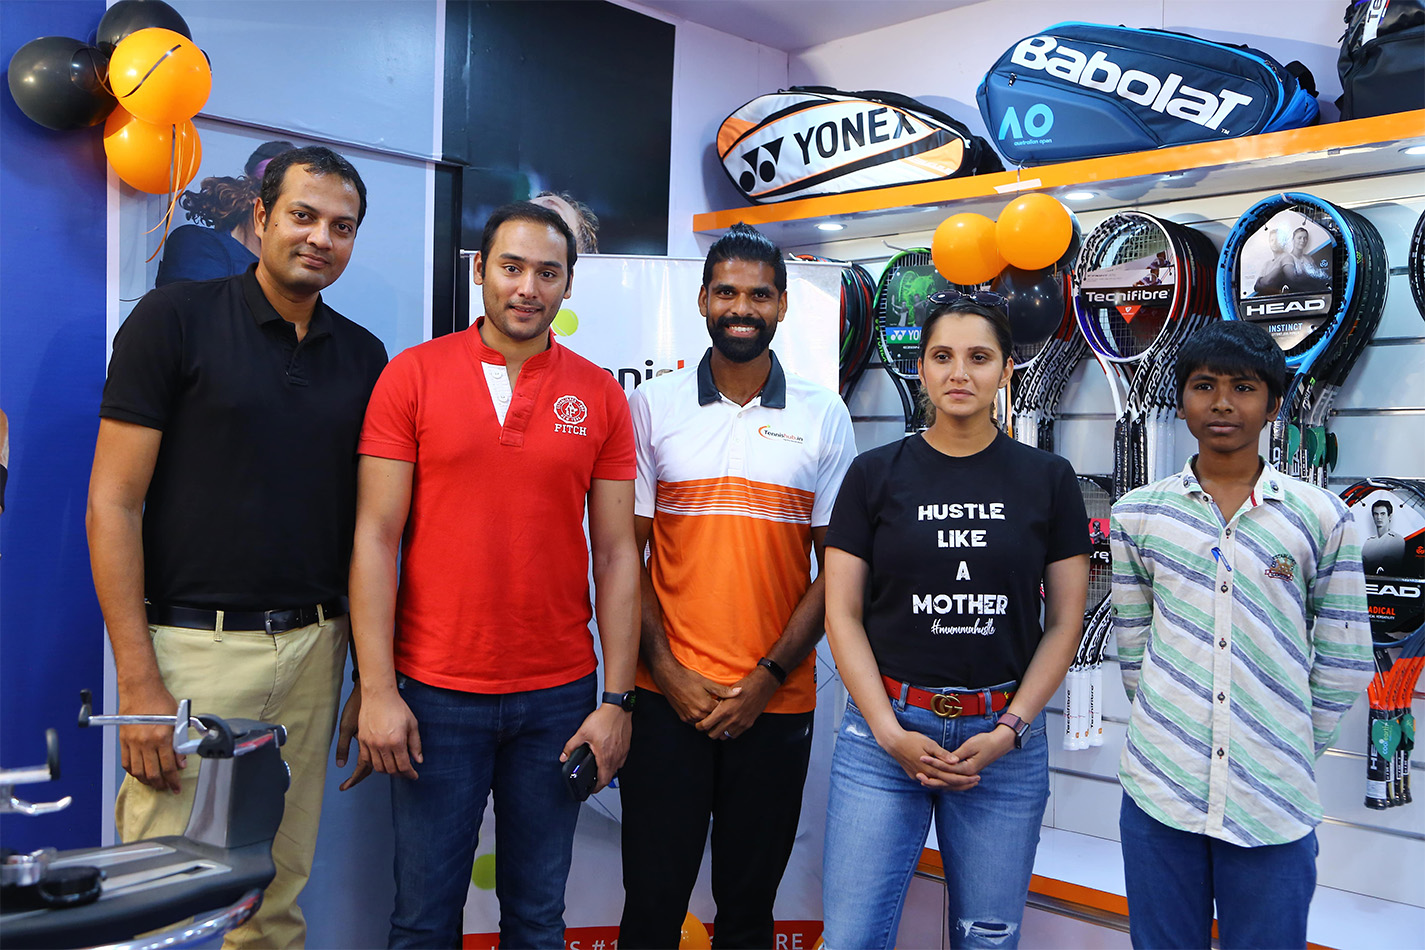 Startup Svitch Bike Opens An Experience Centre In Hyderabad - BW Autoworld